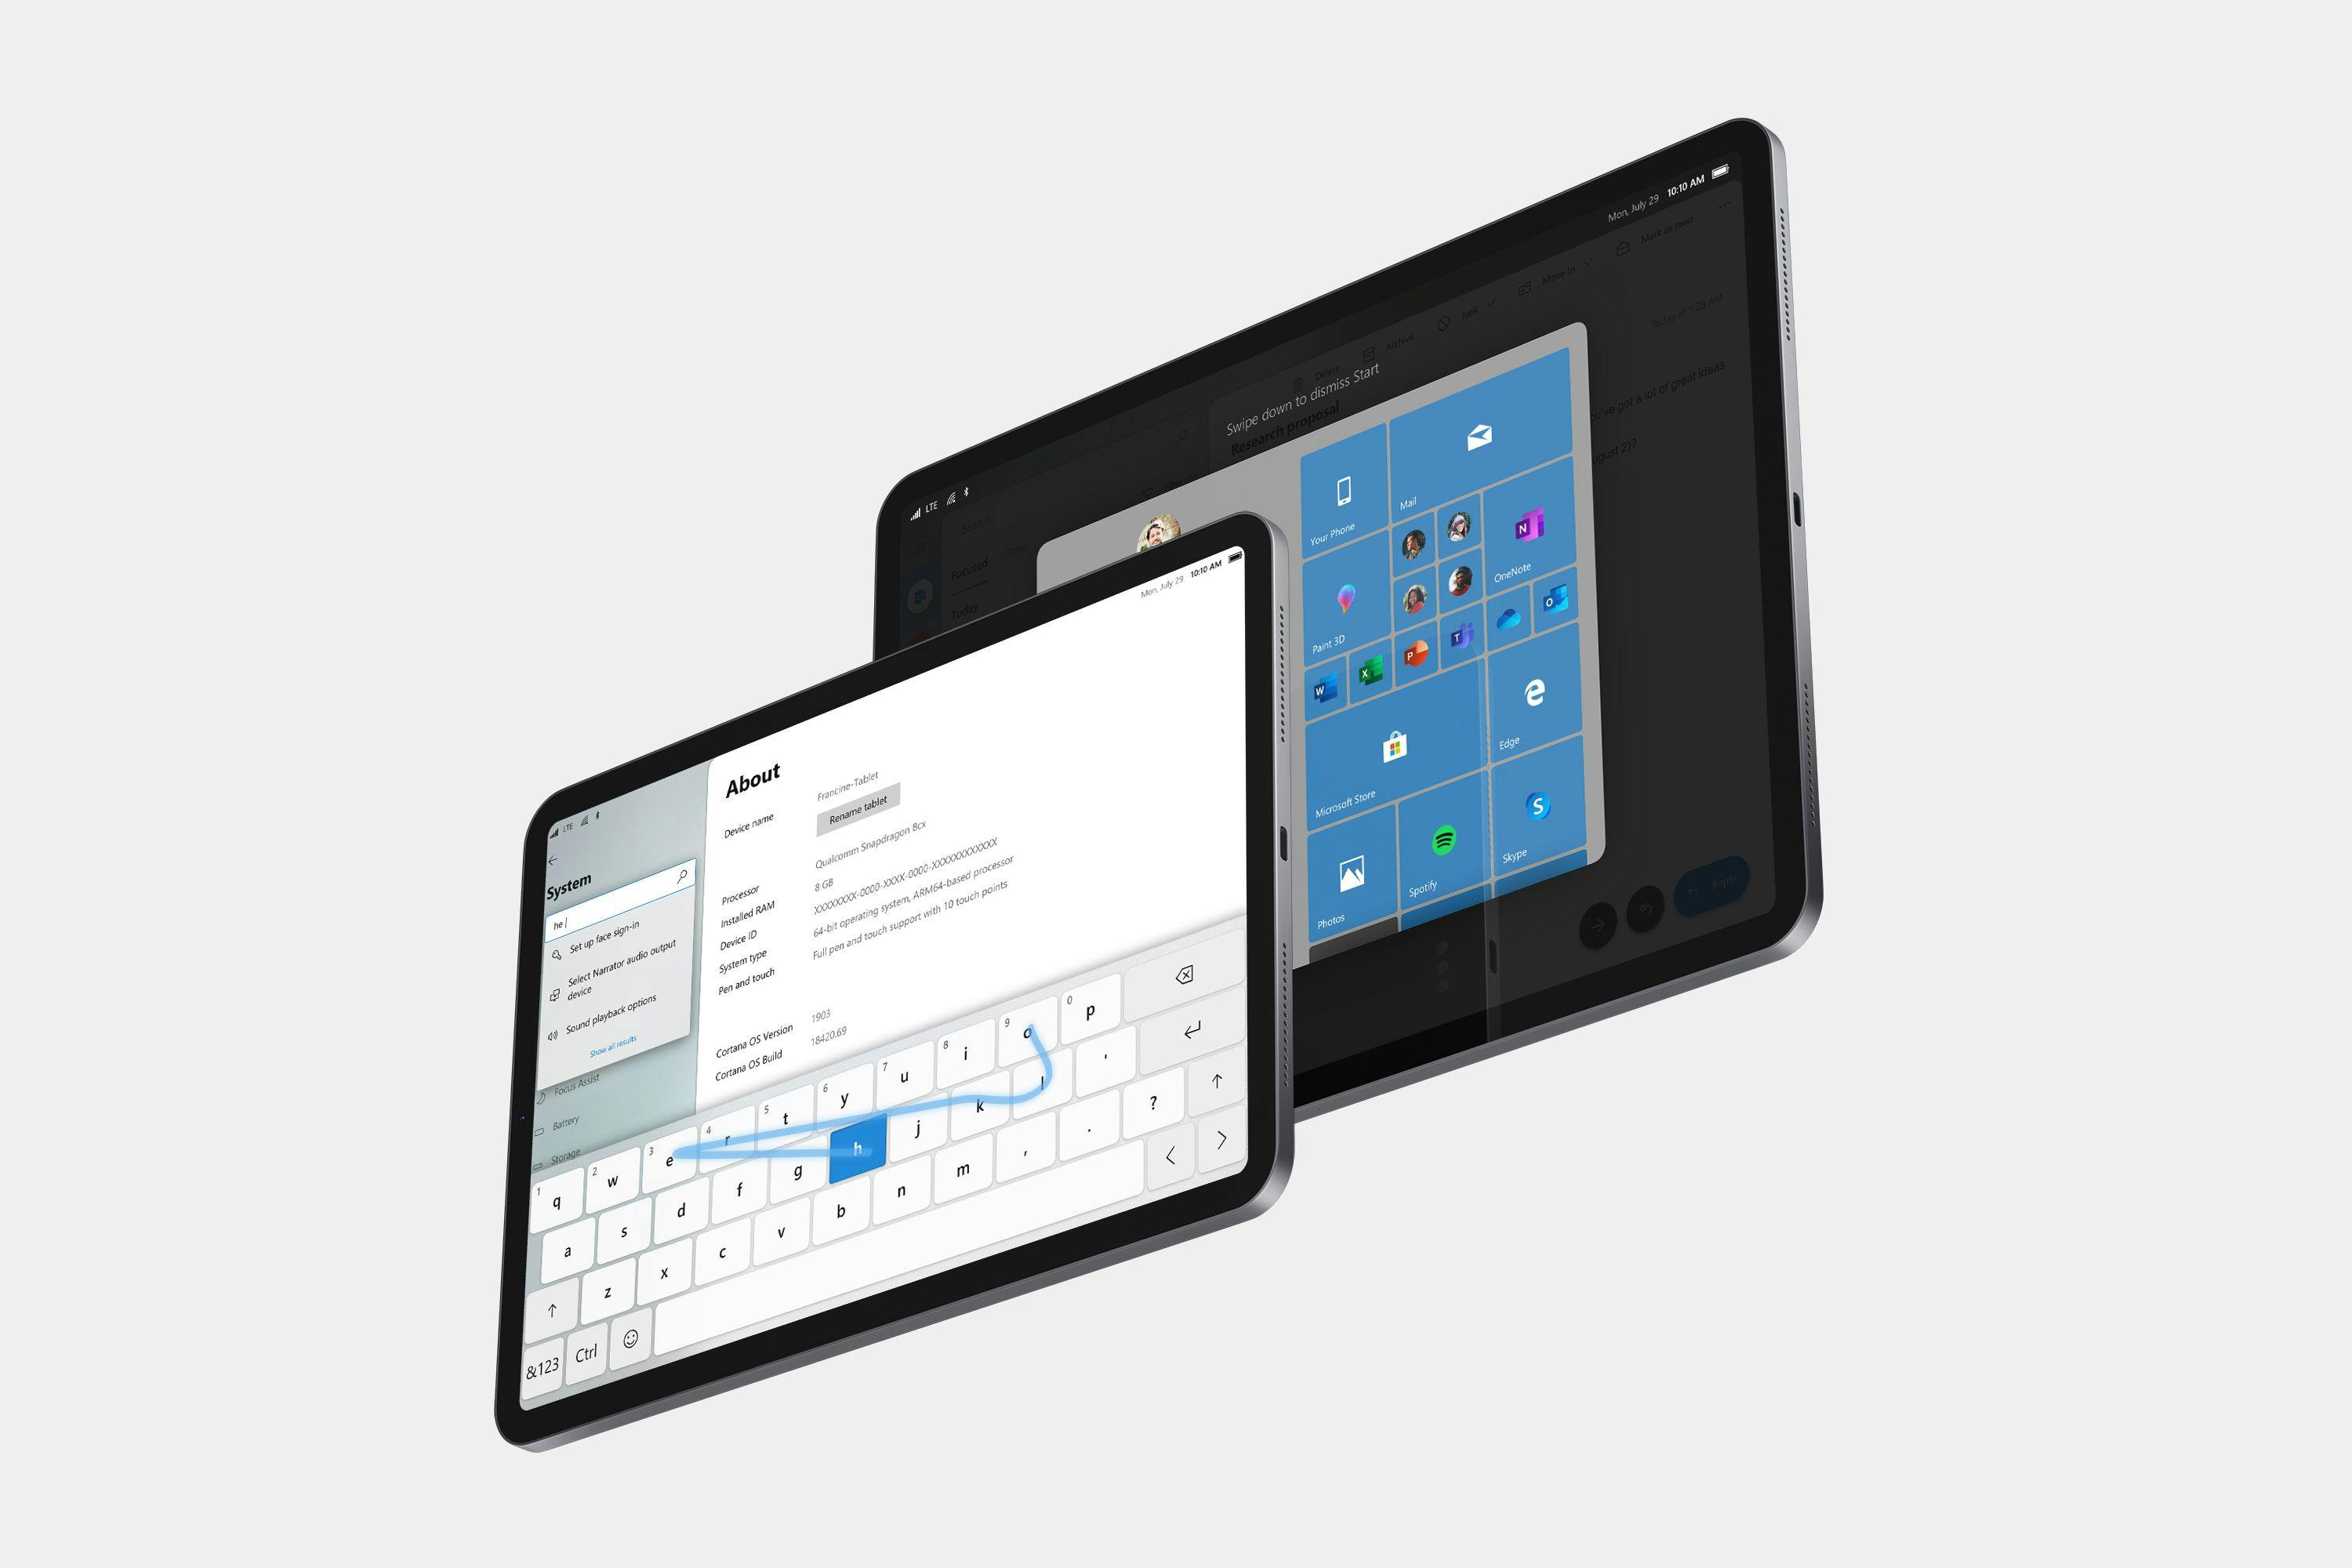 The keyboard is powered by the same SwiftKey intelligence as on Windows 10 and includes gestural typing. Other gestures are used to access system surfaces.